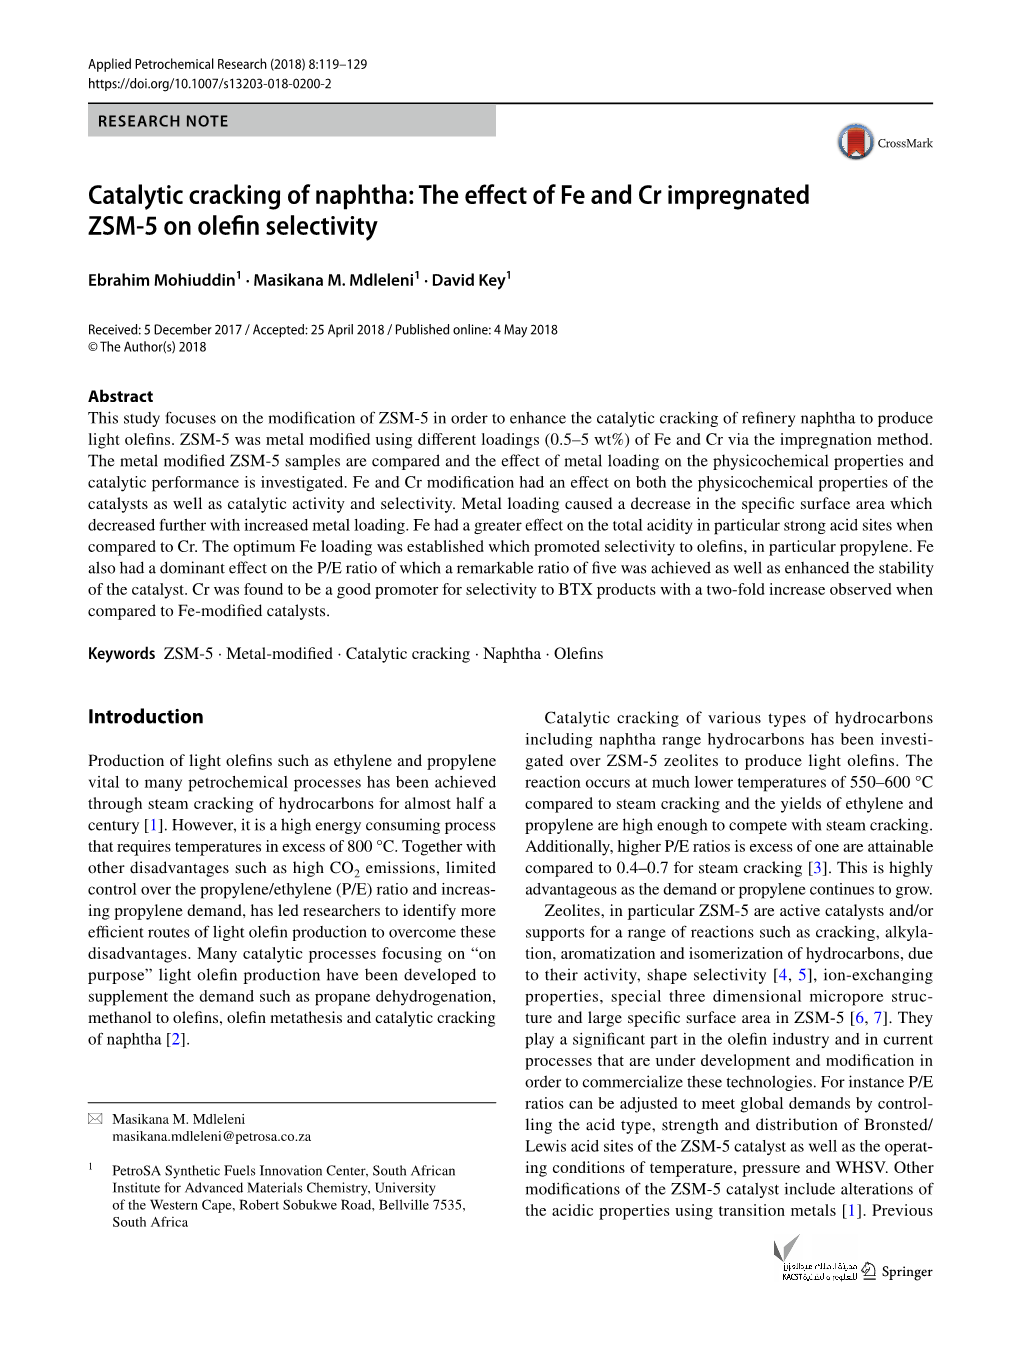 The Effect of Fe and Cr Impregnated ZSM-5 on Olefin Selectivity